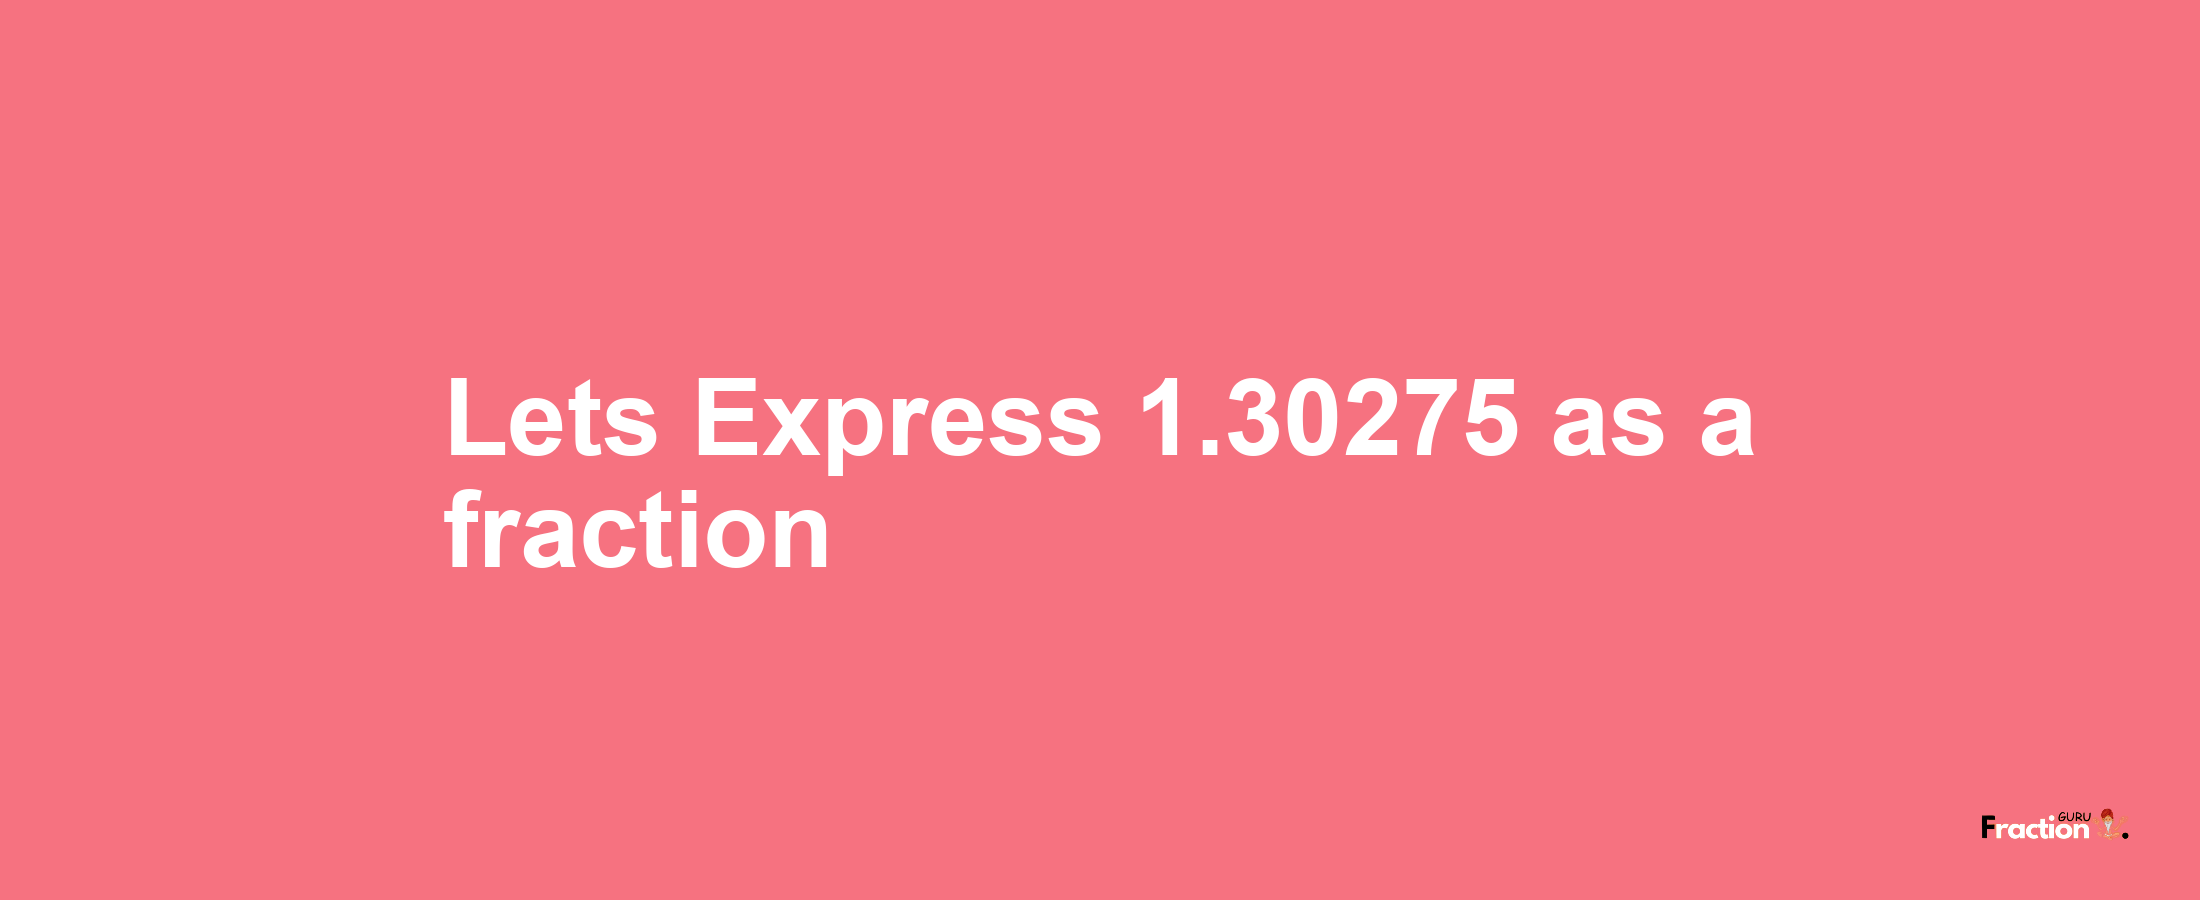 Lets Express 1.30275 as afraction